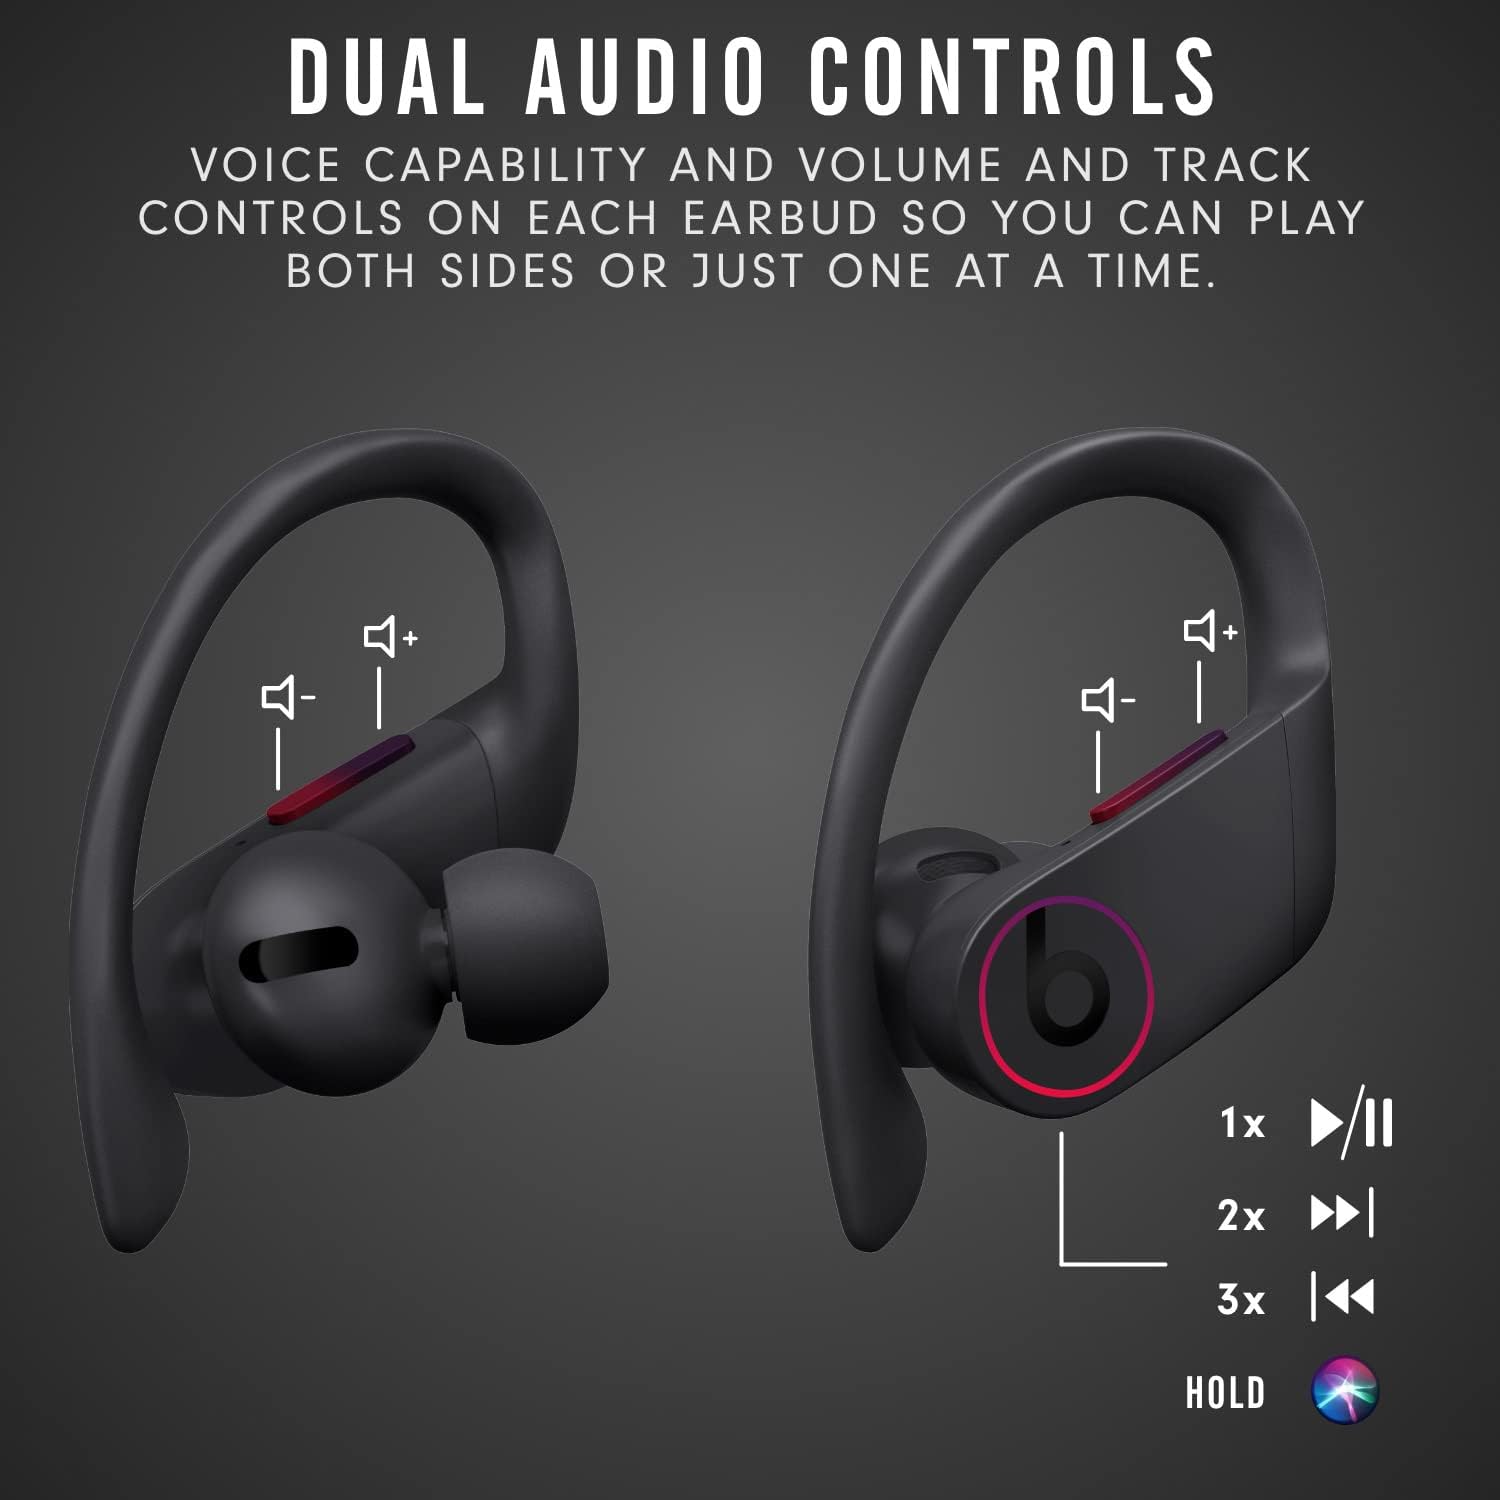 MV6Y2 Beats Powerbeats Pro Earphones - Play Both Sides or Just One at a Time 0190199701984